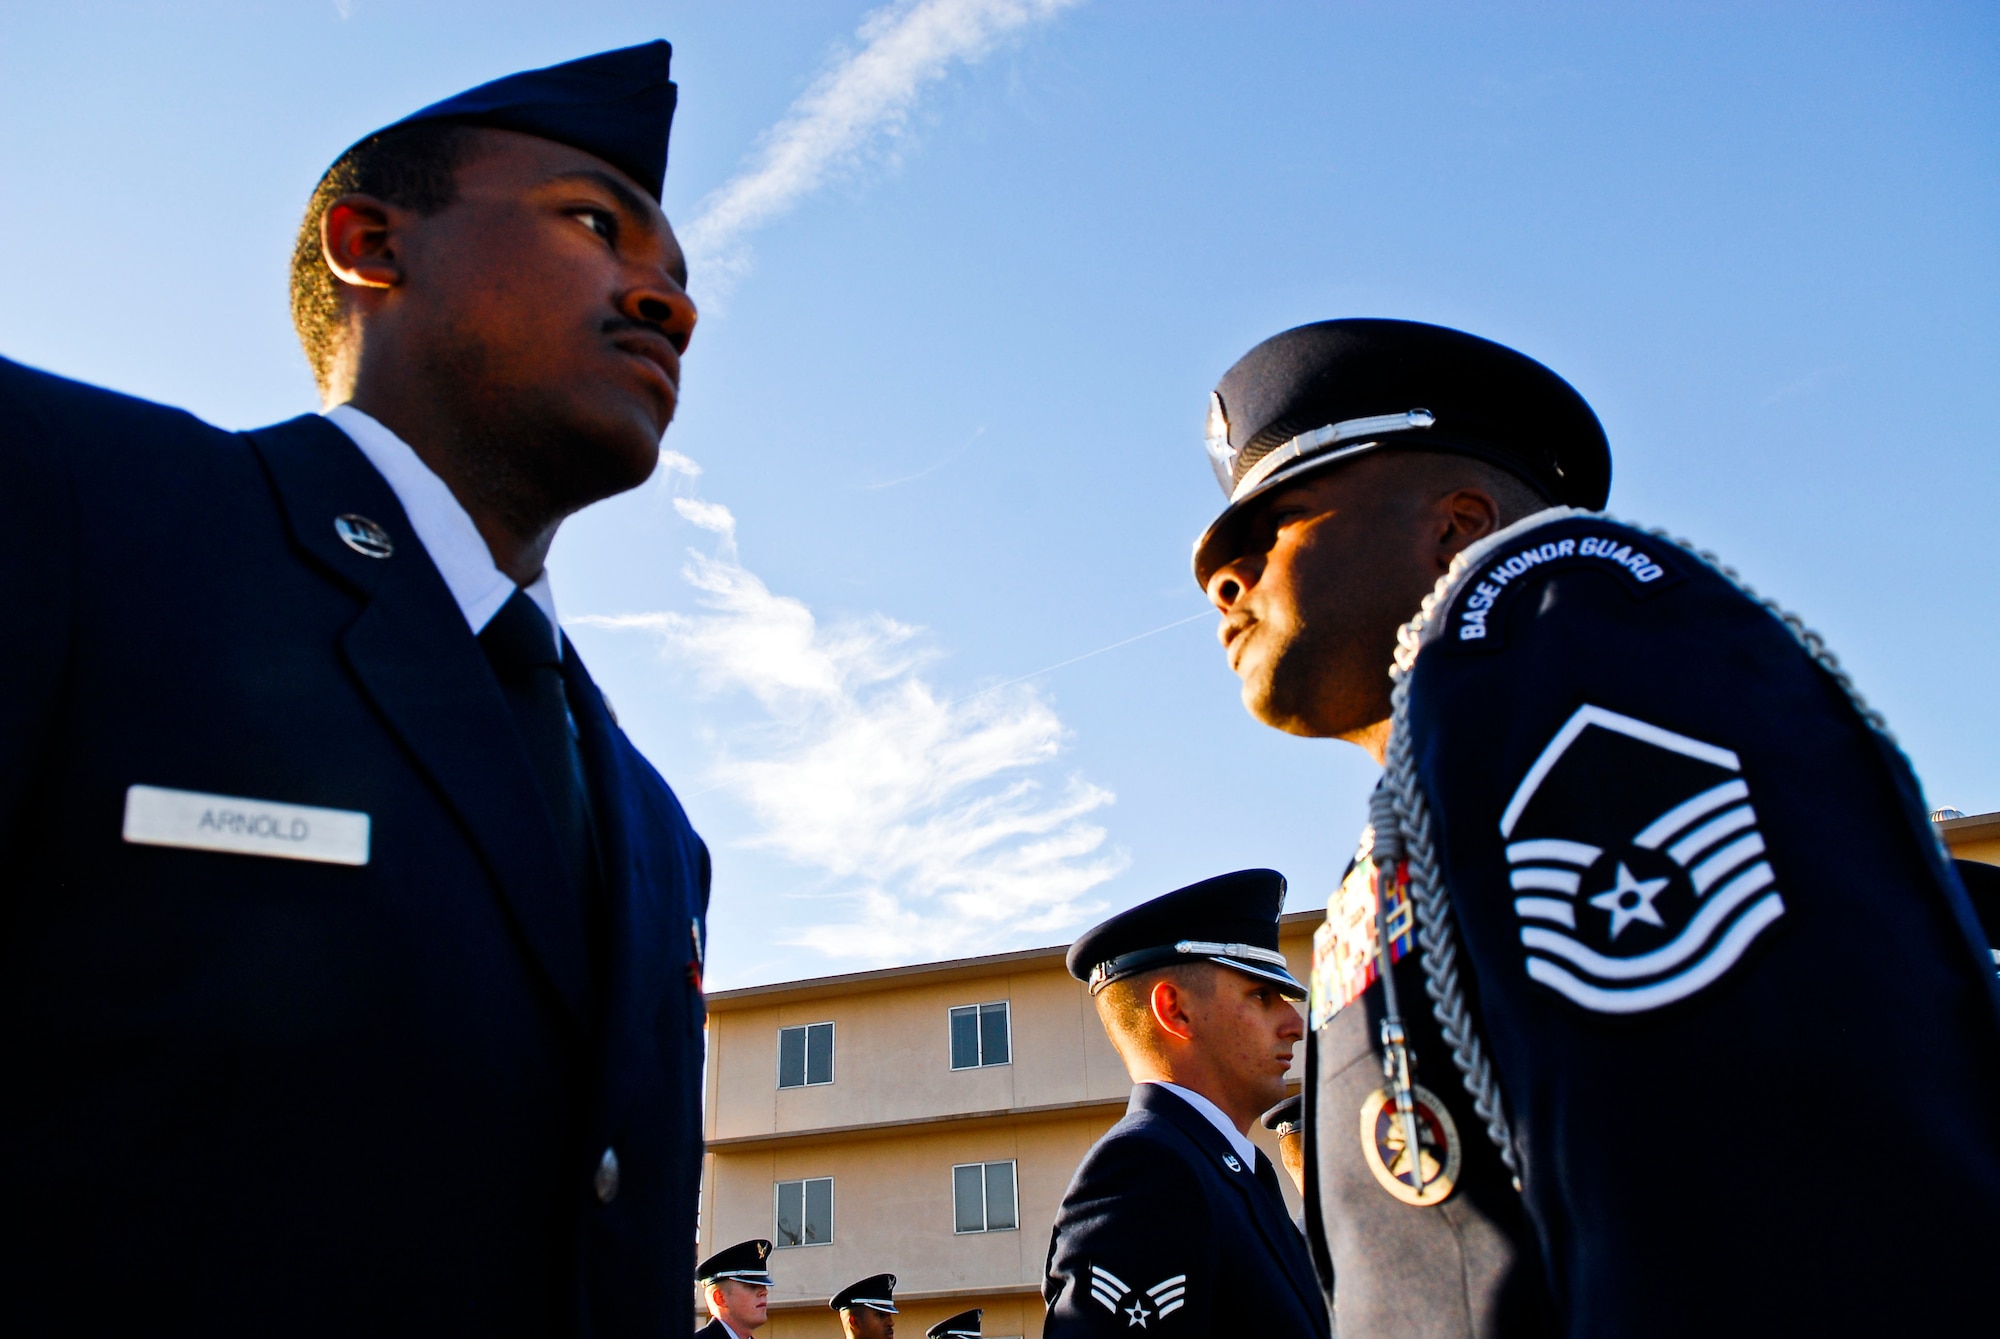 Master Sgt. Keith Cooper, 56th Force Support Squadron Luke Air Force Base Honor Guard superintendent, inspects Airman 1st Class Boushon Arnold, 308th Aircraft Maintenance Unit, Oct. 7 during a uniform inspection at the Airman Leadership School parking lot. (U.S. Air Force photo/Senior Airman David Owsianka)